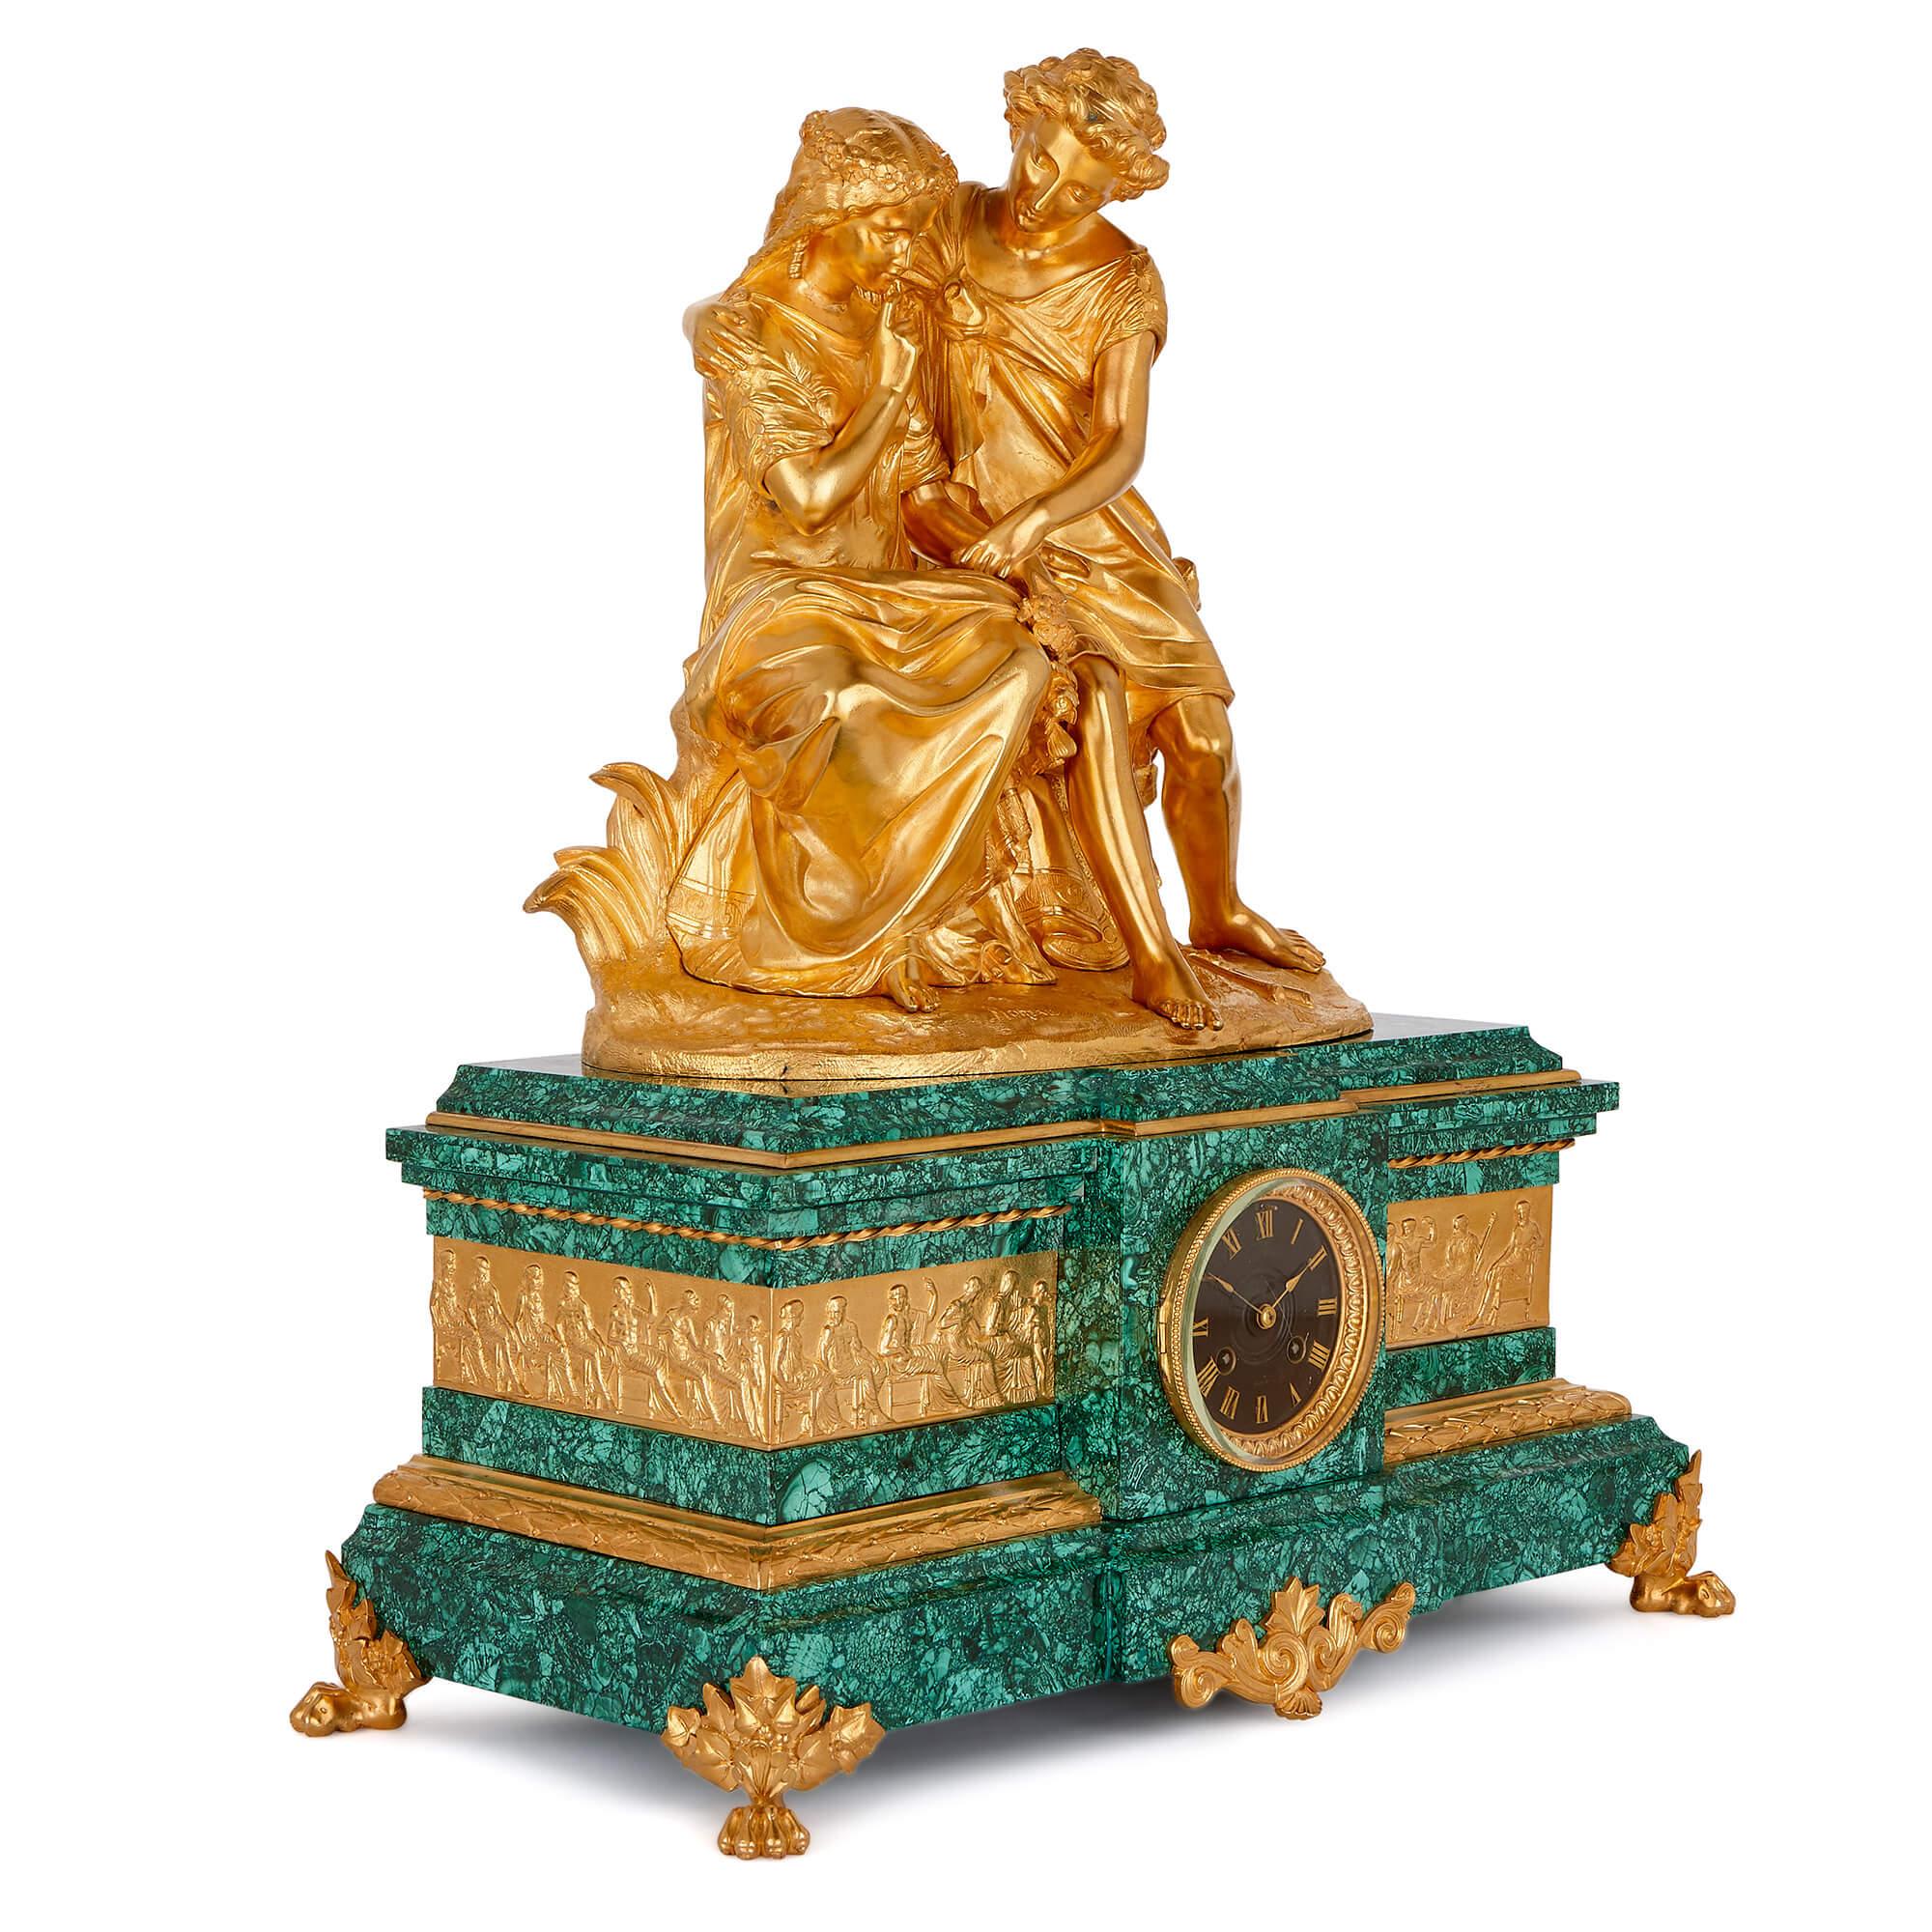 This mantel clock features a beautiful gilt bronze sculpture, which was crafted after a piece by the esteemed French artist, Auguste Moreau. Auguste came from a family of successful French sculptors, his father being Jean-Baptiste Moreau. Auguste’s